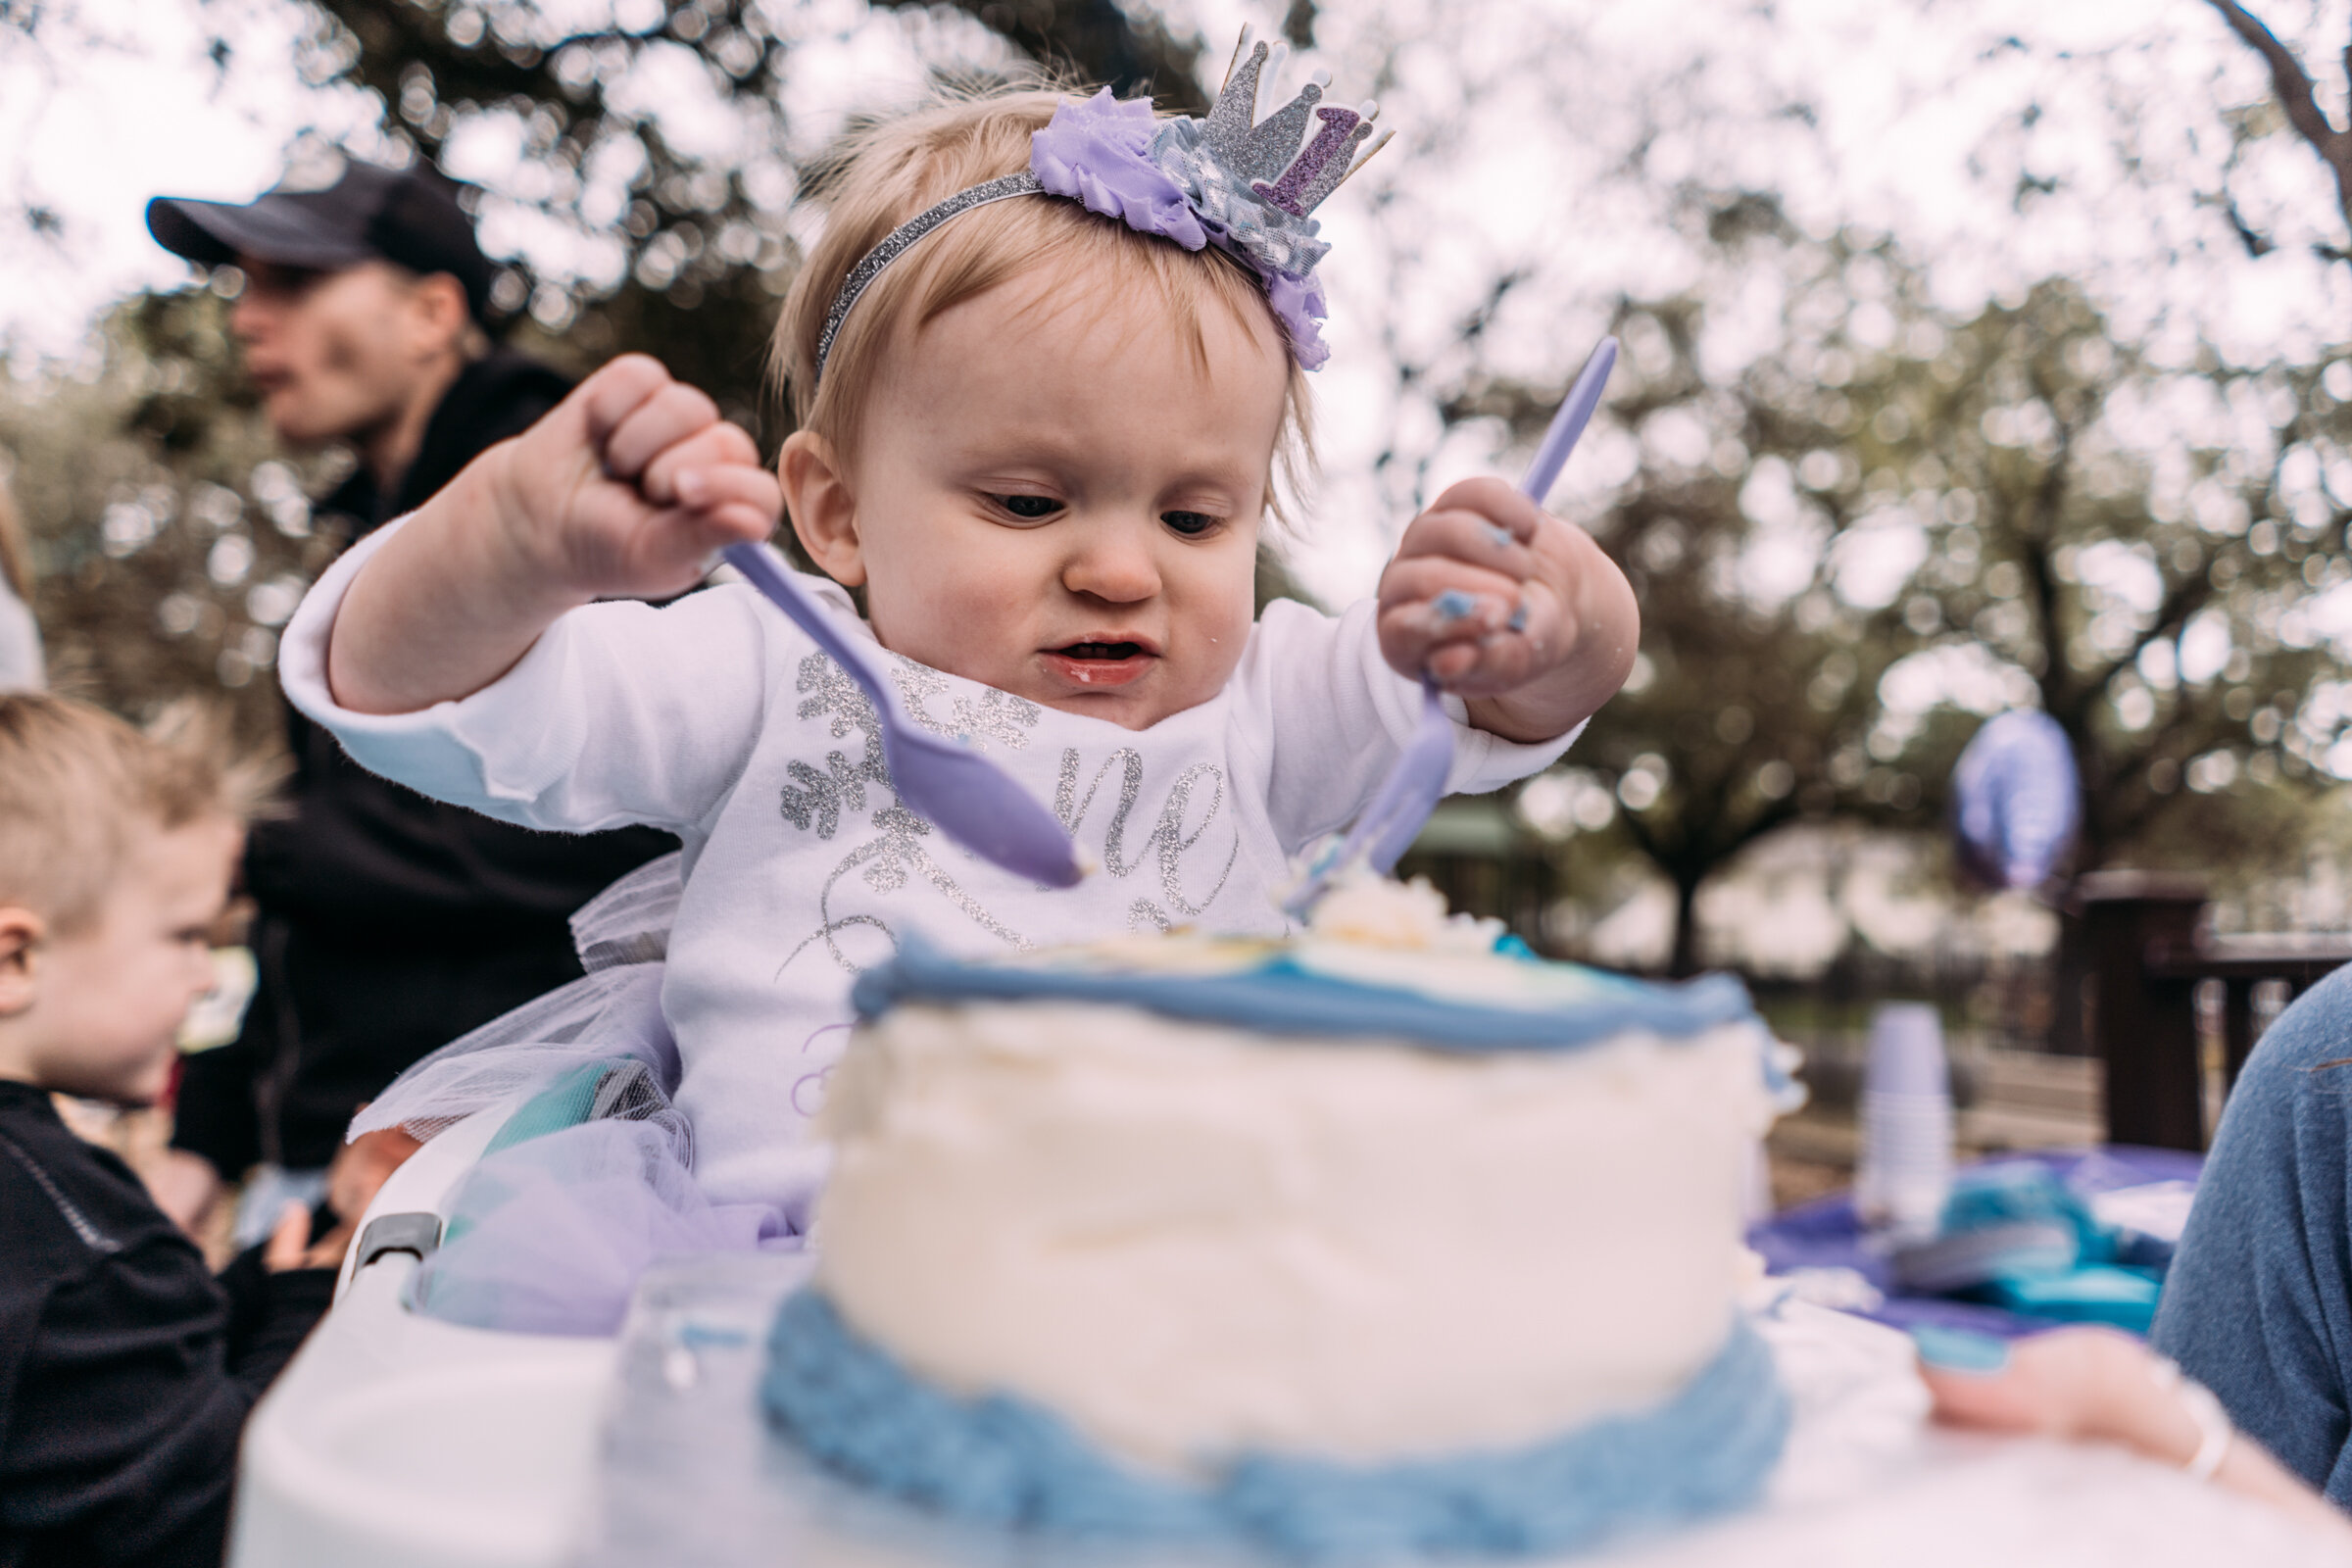  Little one didn’t want to get her hands dirty, but she just had to eat that delicious cake! 